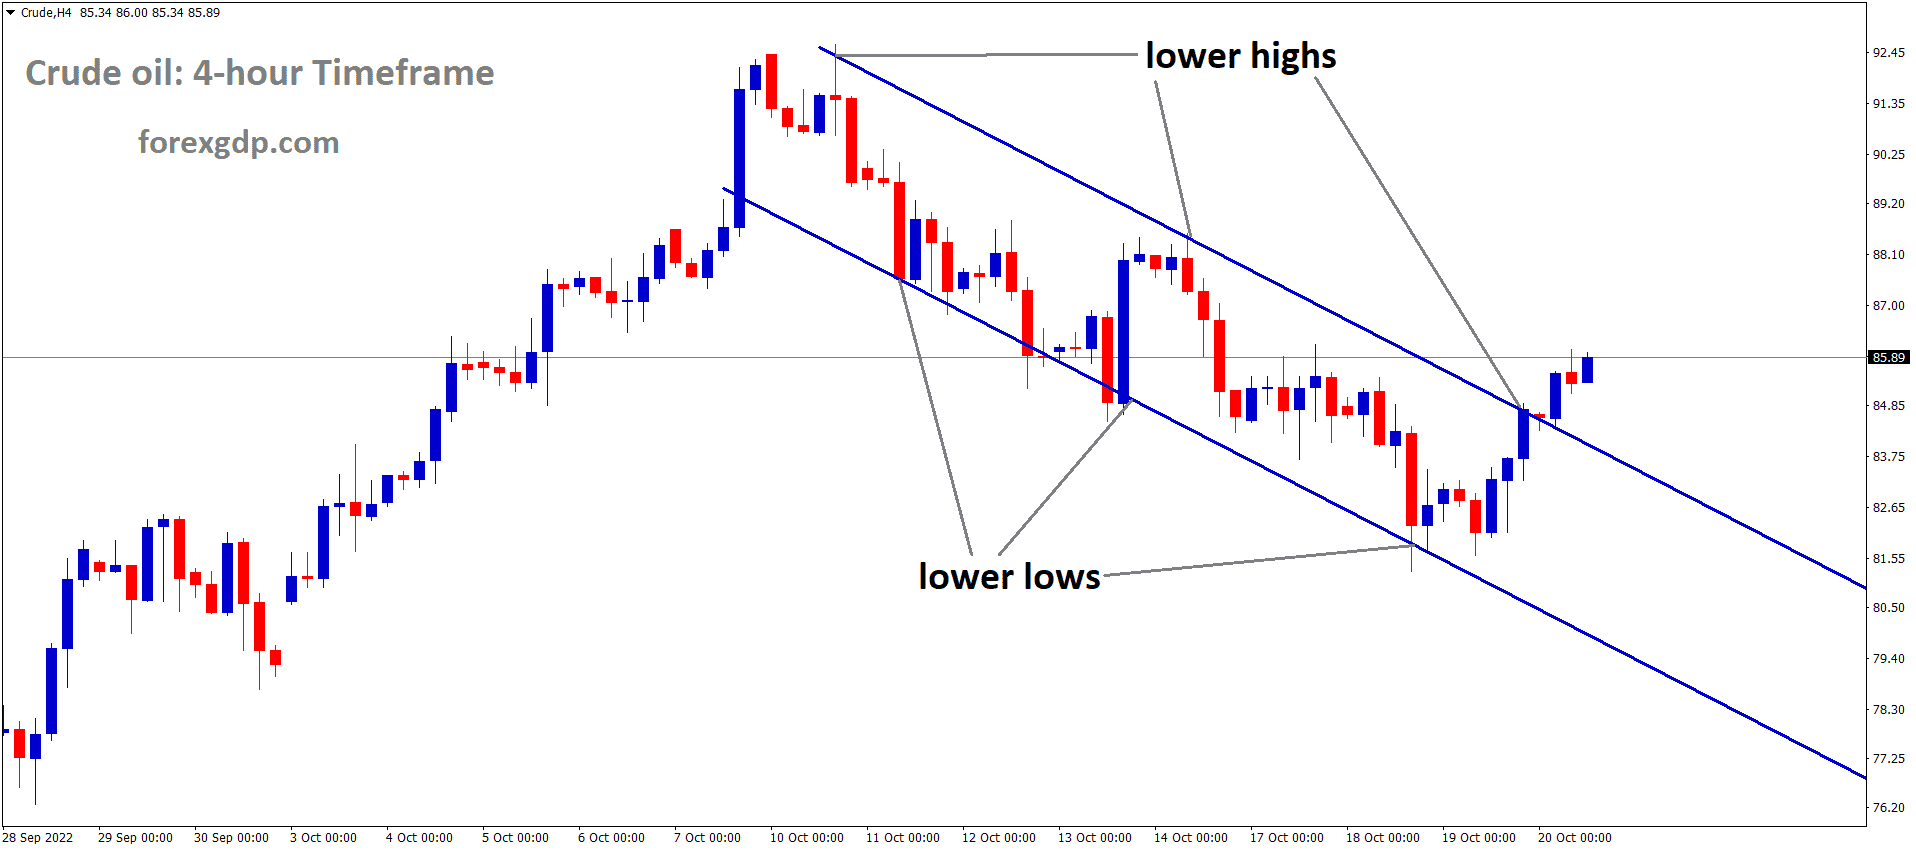 Crude oil price is moving in the Descending channel and the market has reached the lower high area of the channel